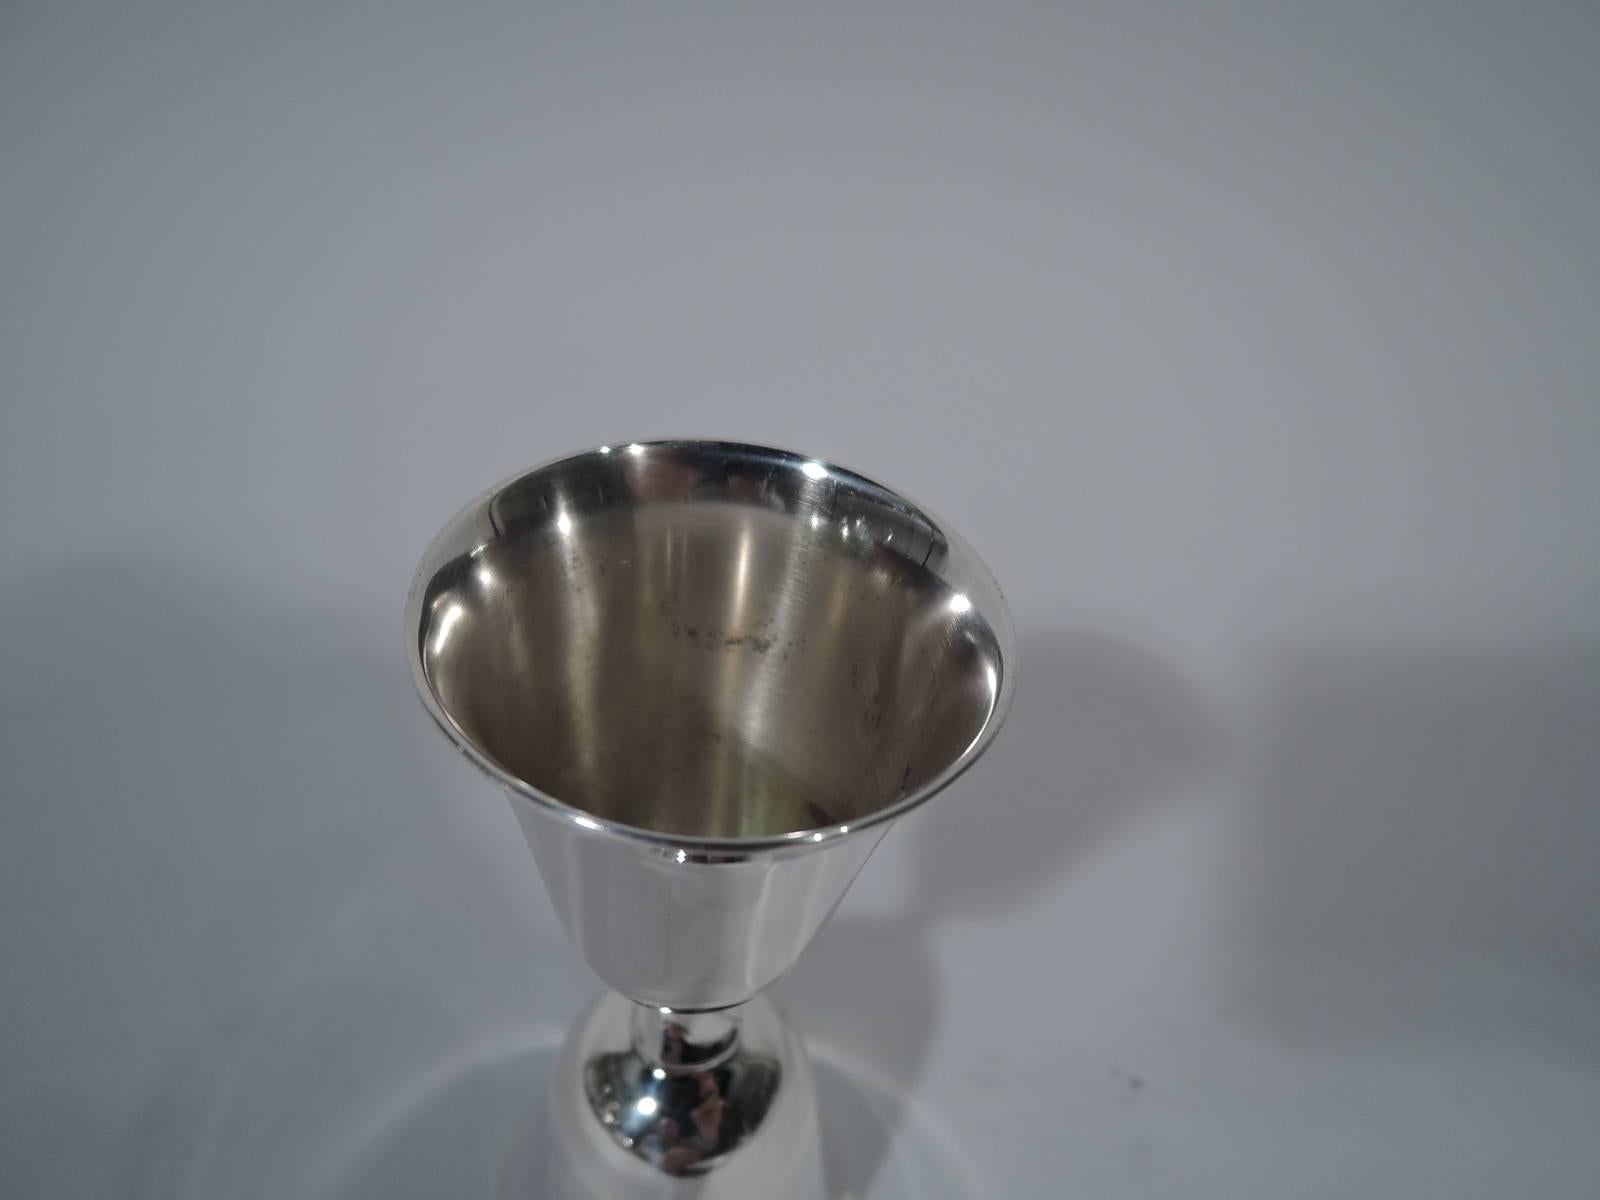 Mid-Century Modern sterling silver double jigger. Made by Reed & Barton in Taunton, Mass., in 1956. One large and one small bell-form bowl joined back-to-back with short twisted stem. Hallmark includes date symbol and no. X755. Weight: 3 troy ounces.